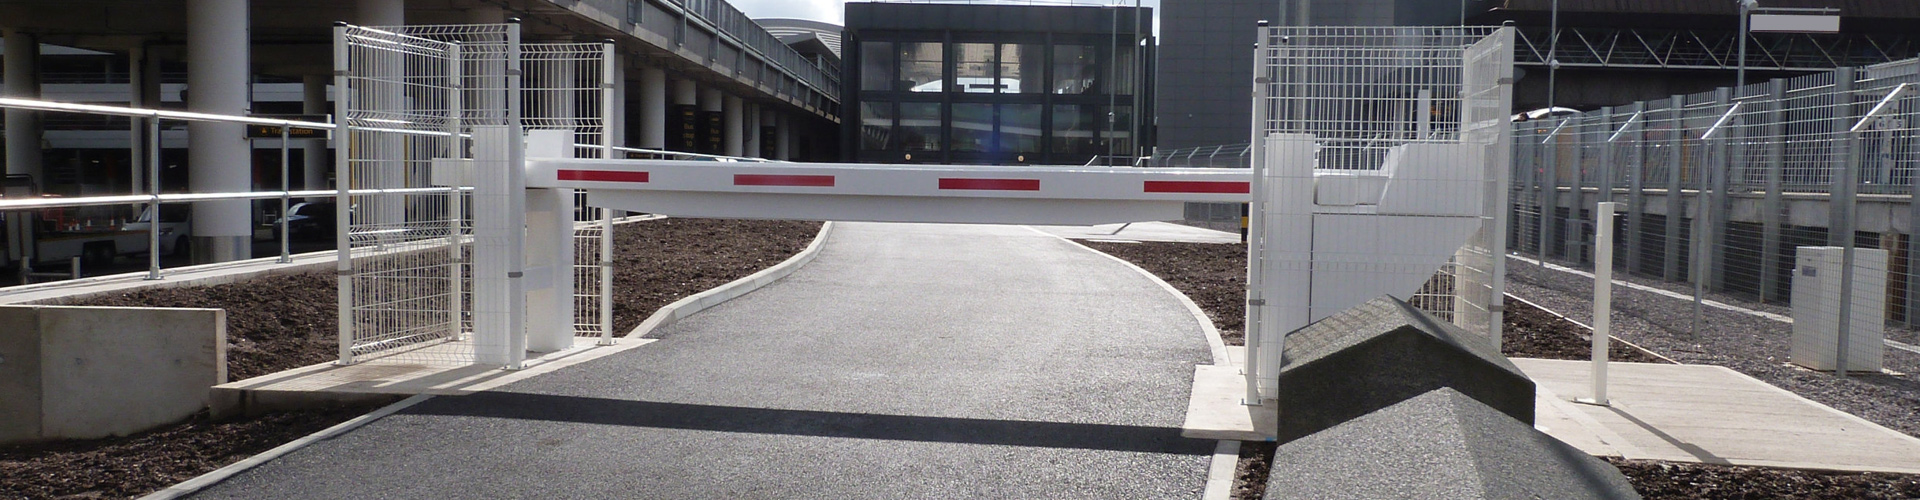 Crash Rated Barrier Suppliers & Manufacturers